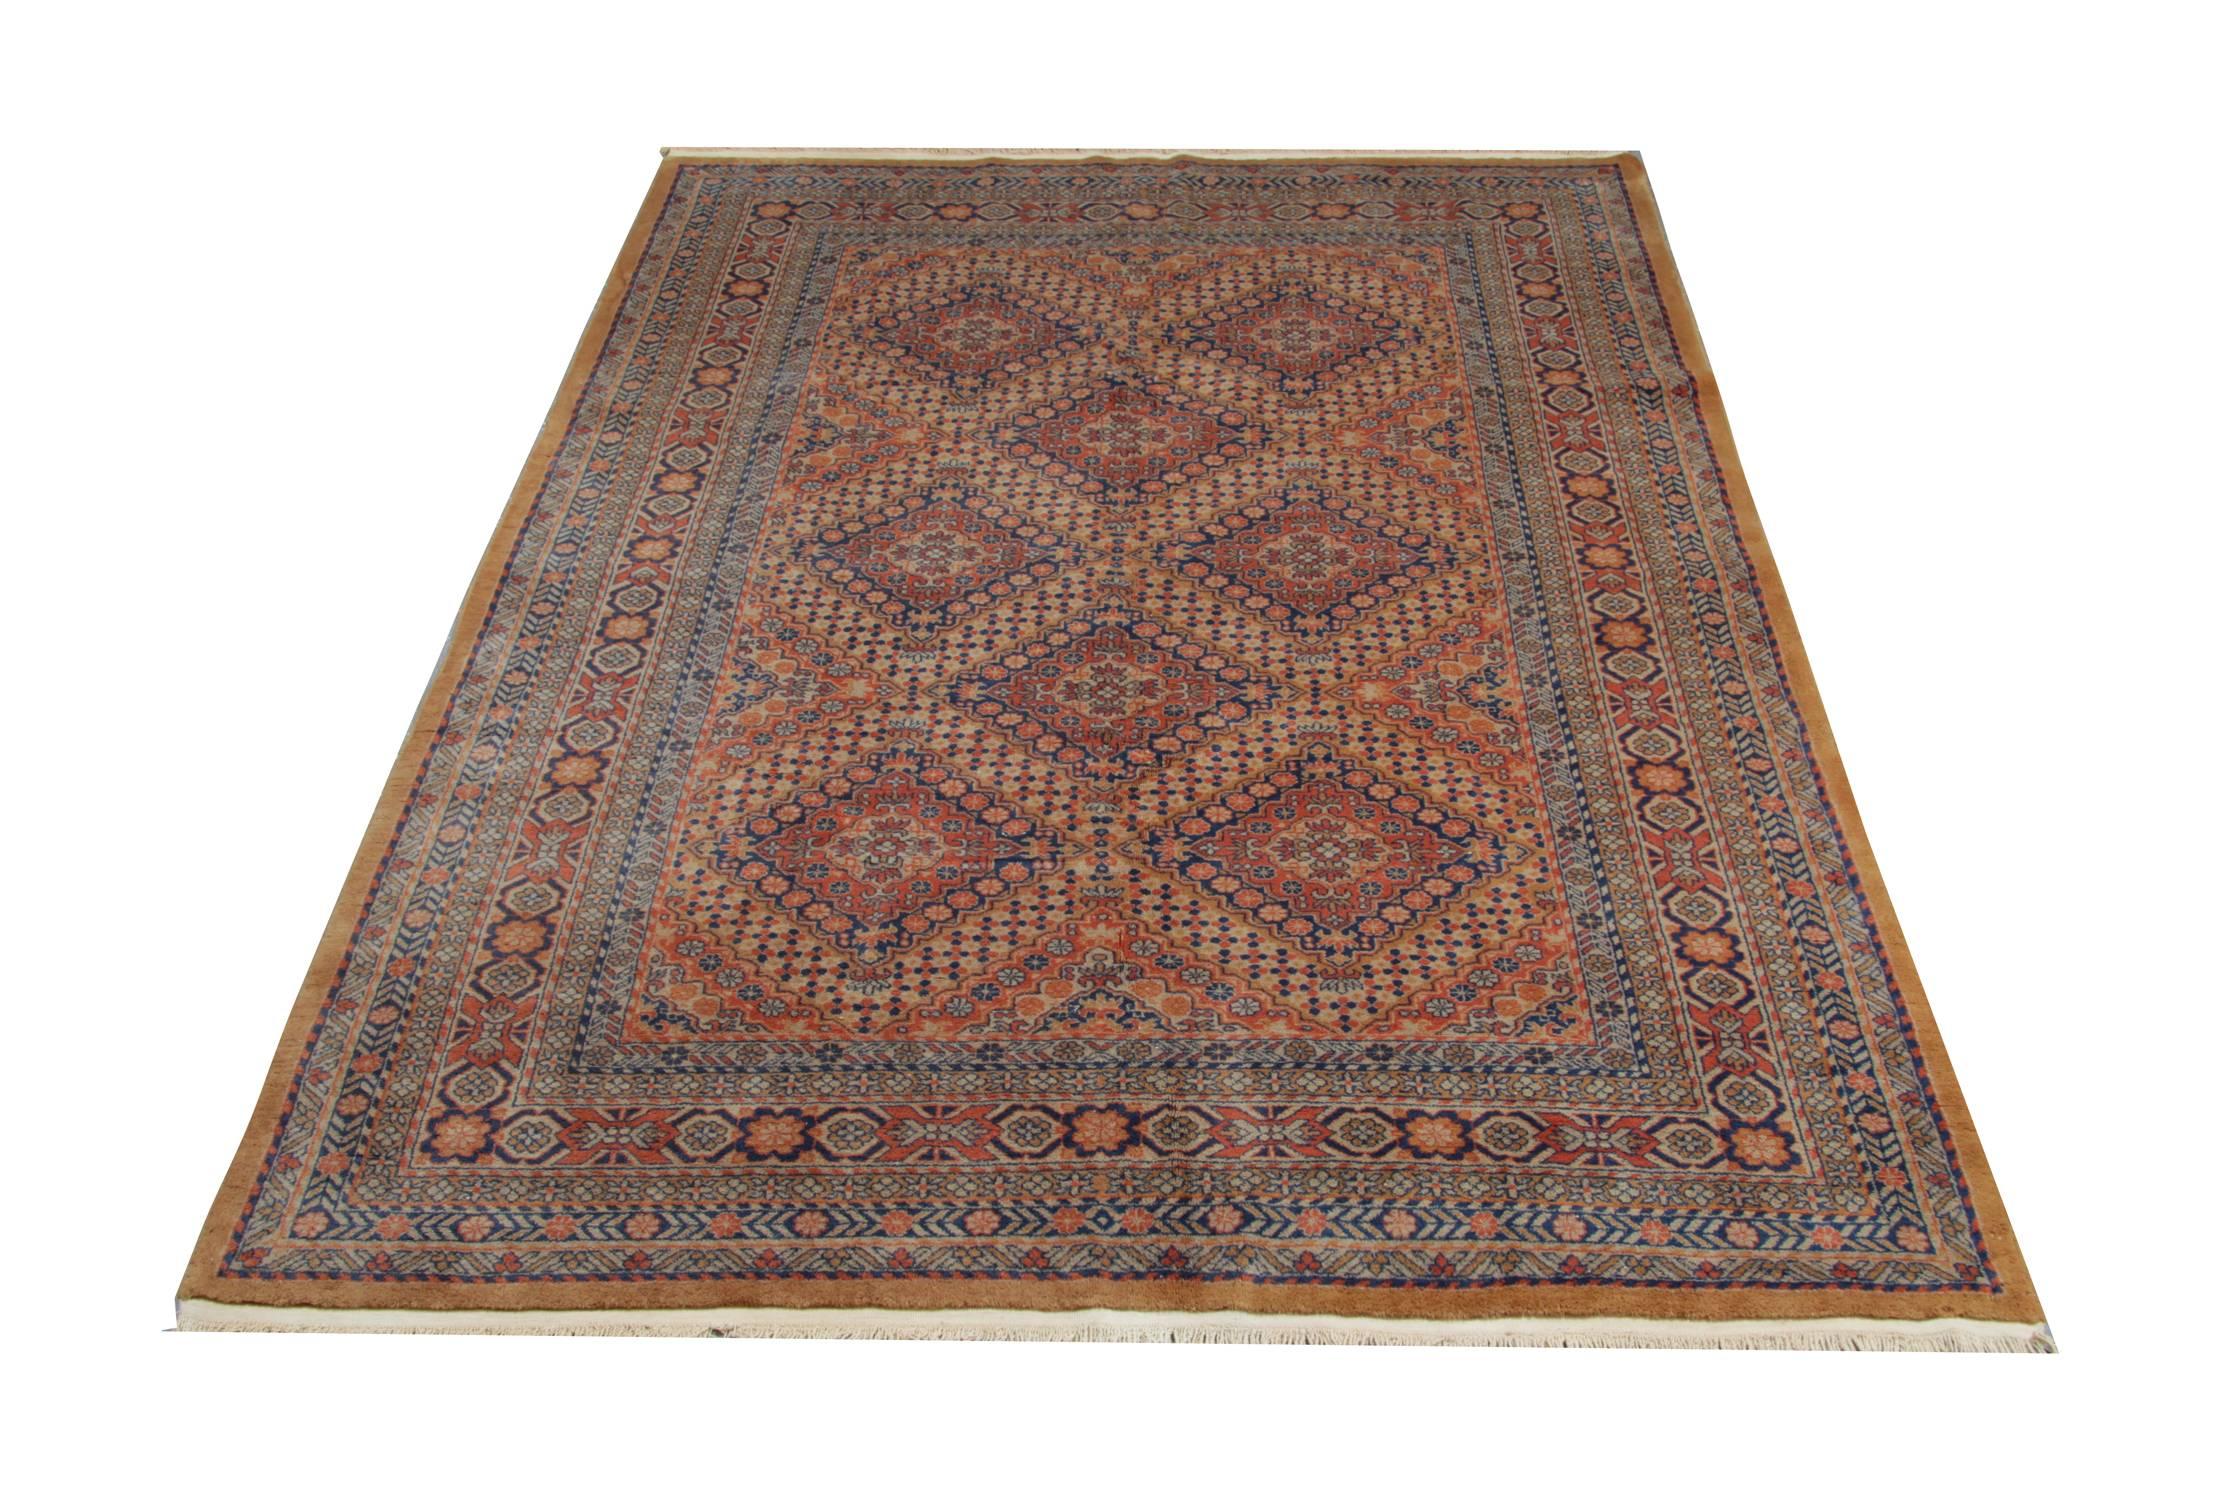 Old Indian rugs are made of wool and cotton and for these traditional rugs are used only 100% natural dyes. This geometric rug is in an excellent condition. The grey rug i s also a vintage rug. The woven rug has a repeating patterns and an all over